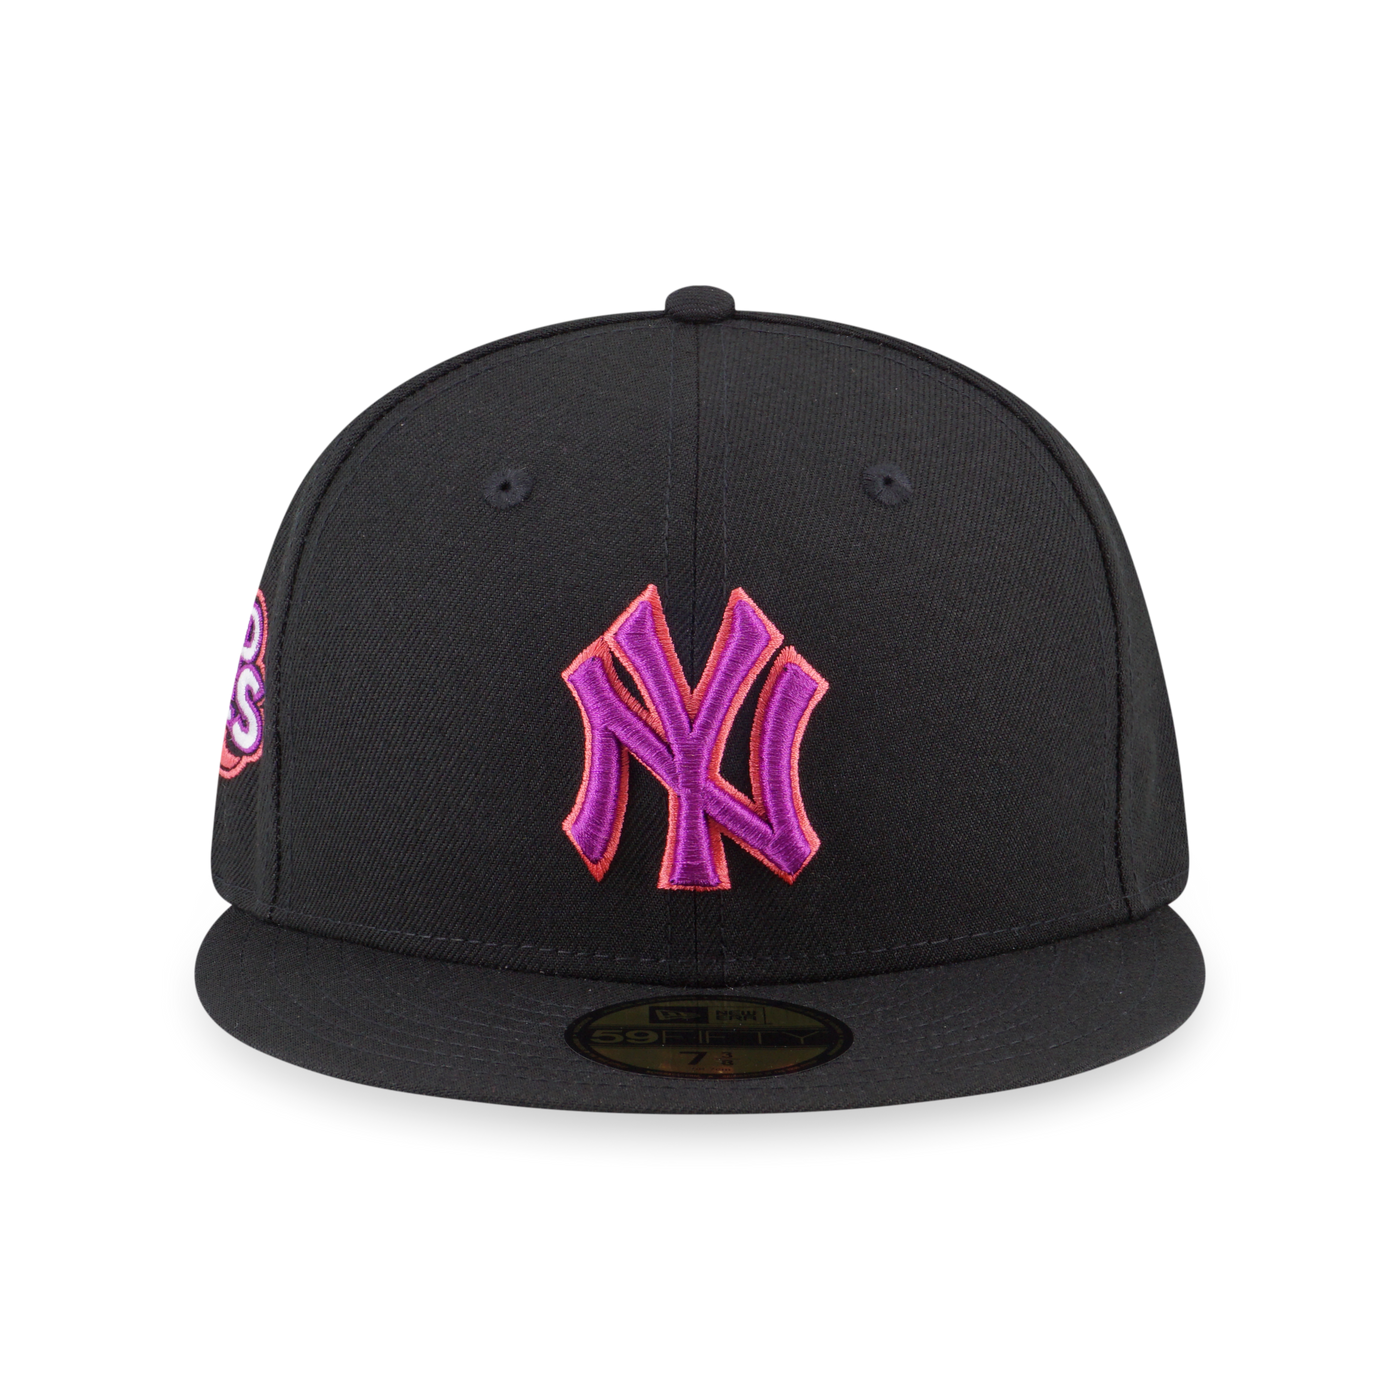 59FIFTY PACK - HALLOWEEN NEW YORK YANKEES BLACK 59FIFTY CAP